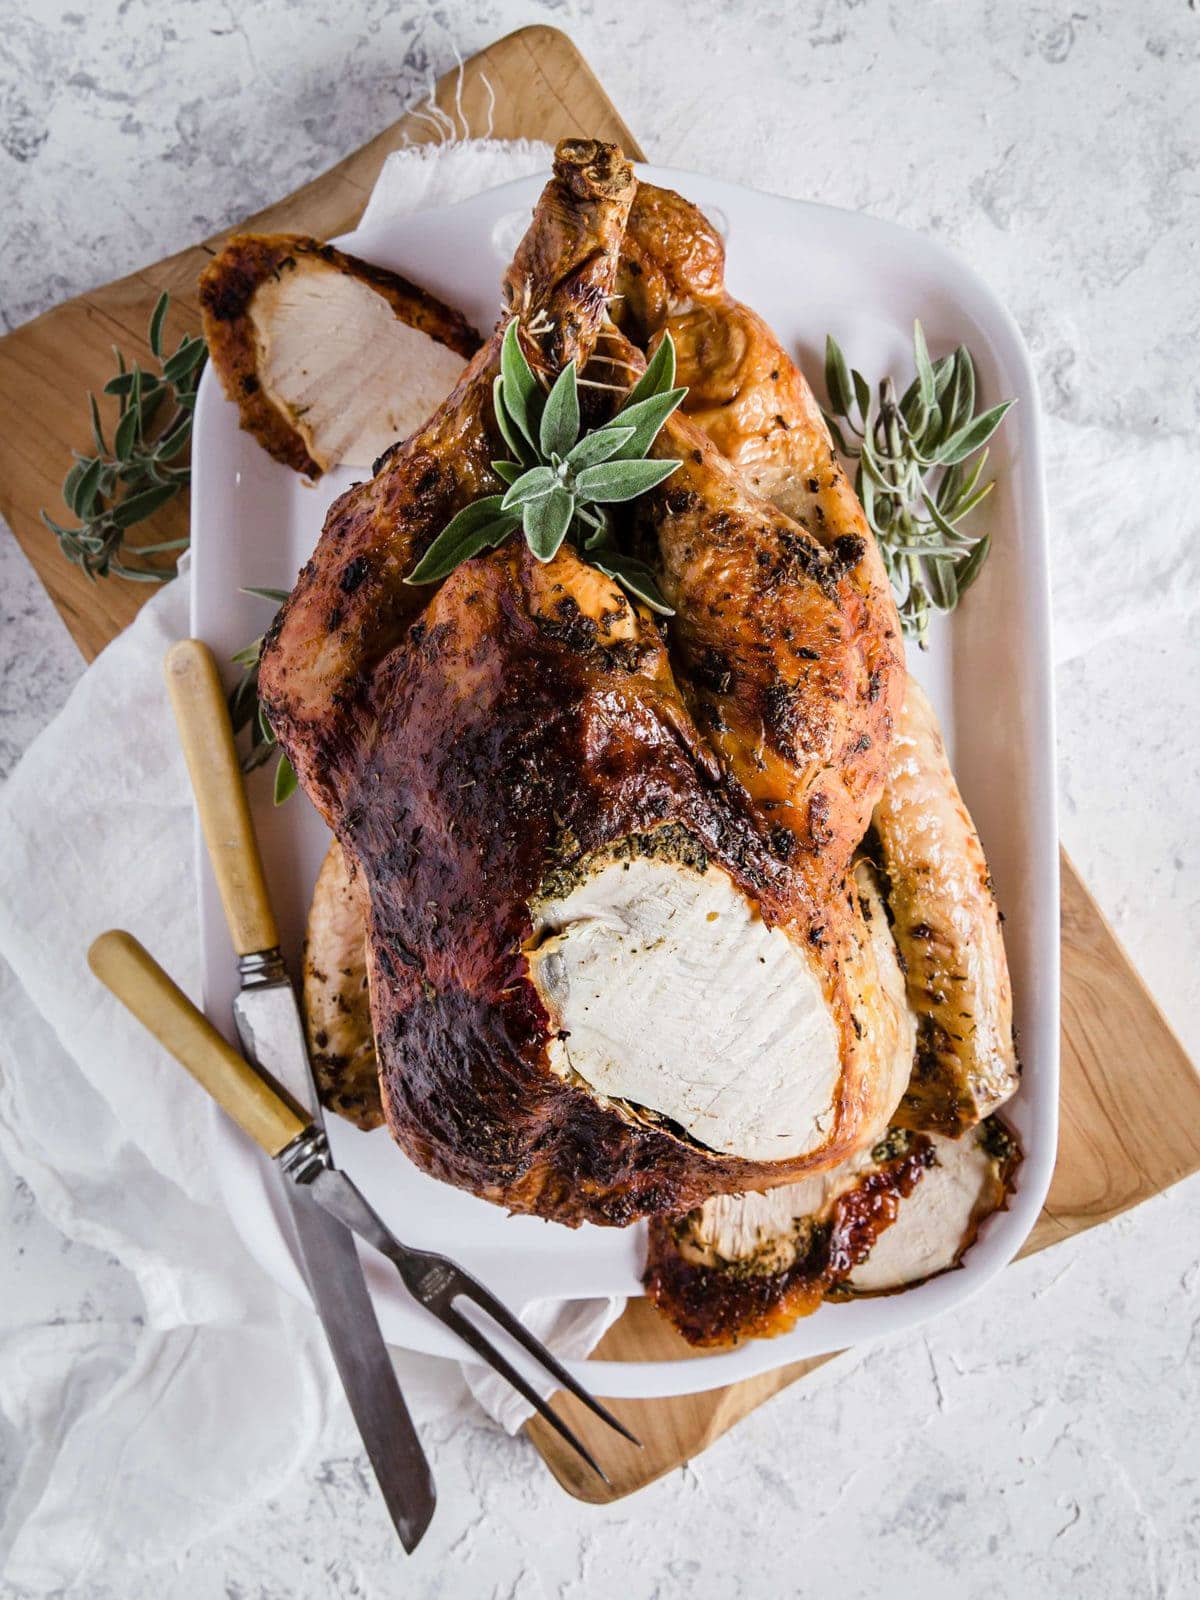 An Herb Butter Roasted Turkey fresh out of the oven, surrounded by fresh herbs and carving utensils.